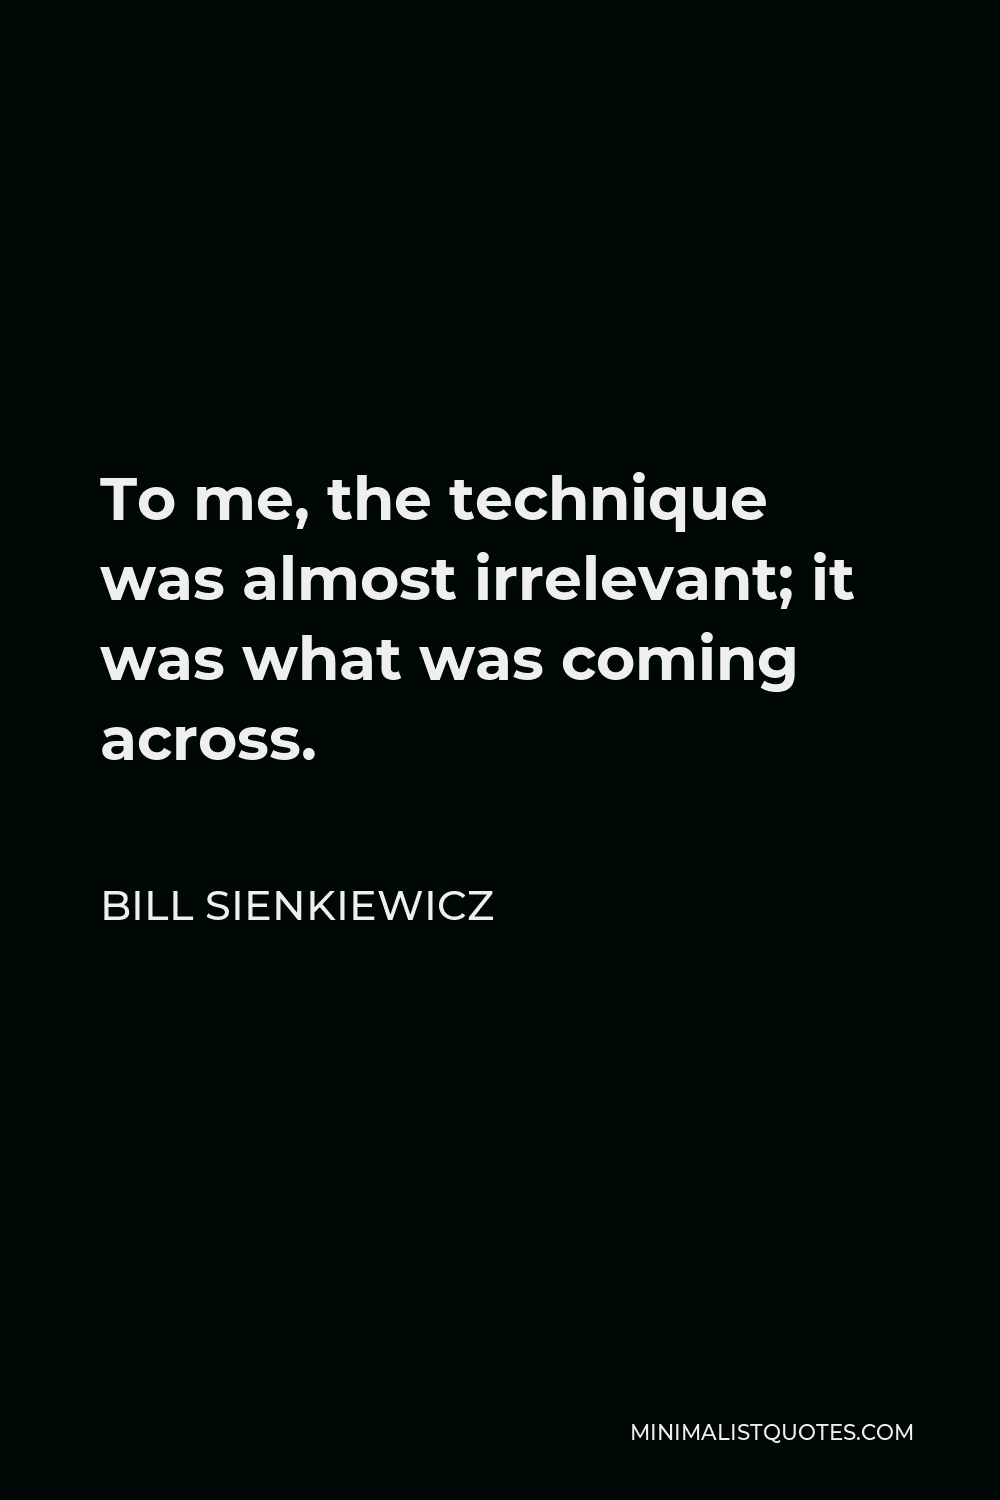 Bill Sienkiewicz Quote - To me, the technique was almost irrelevant; it was what was coming across.